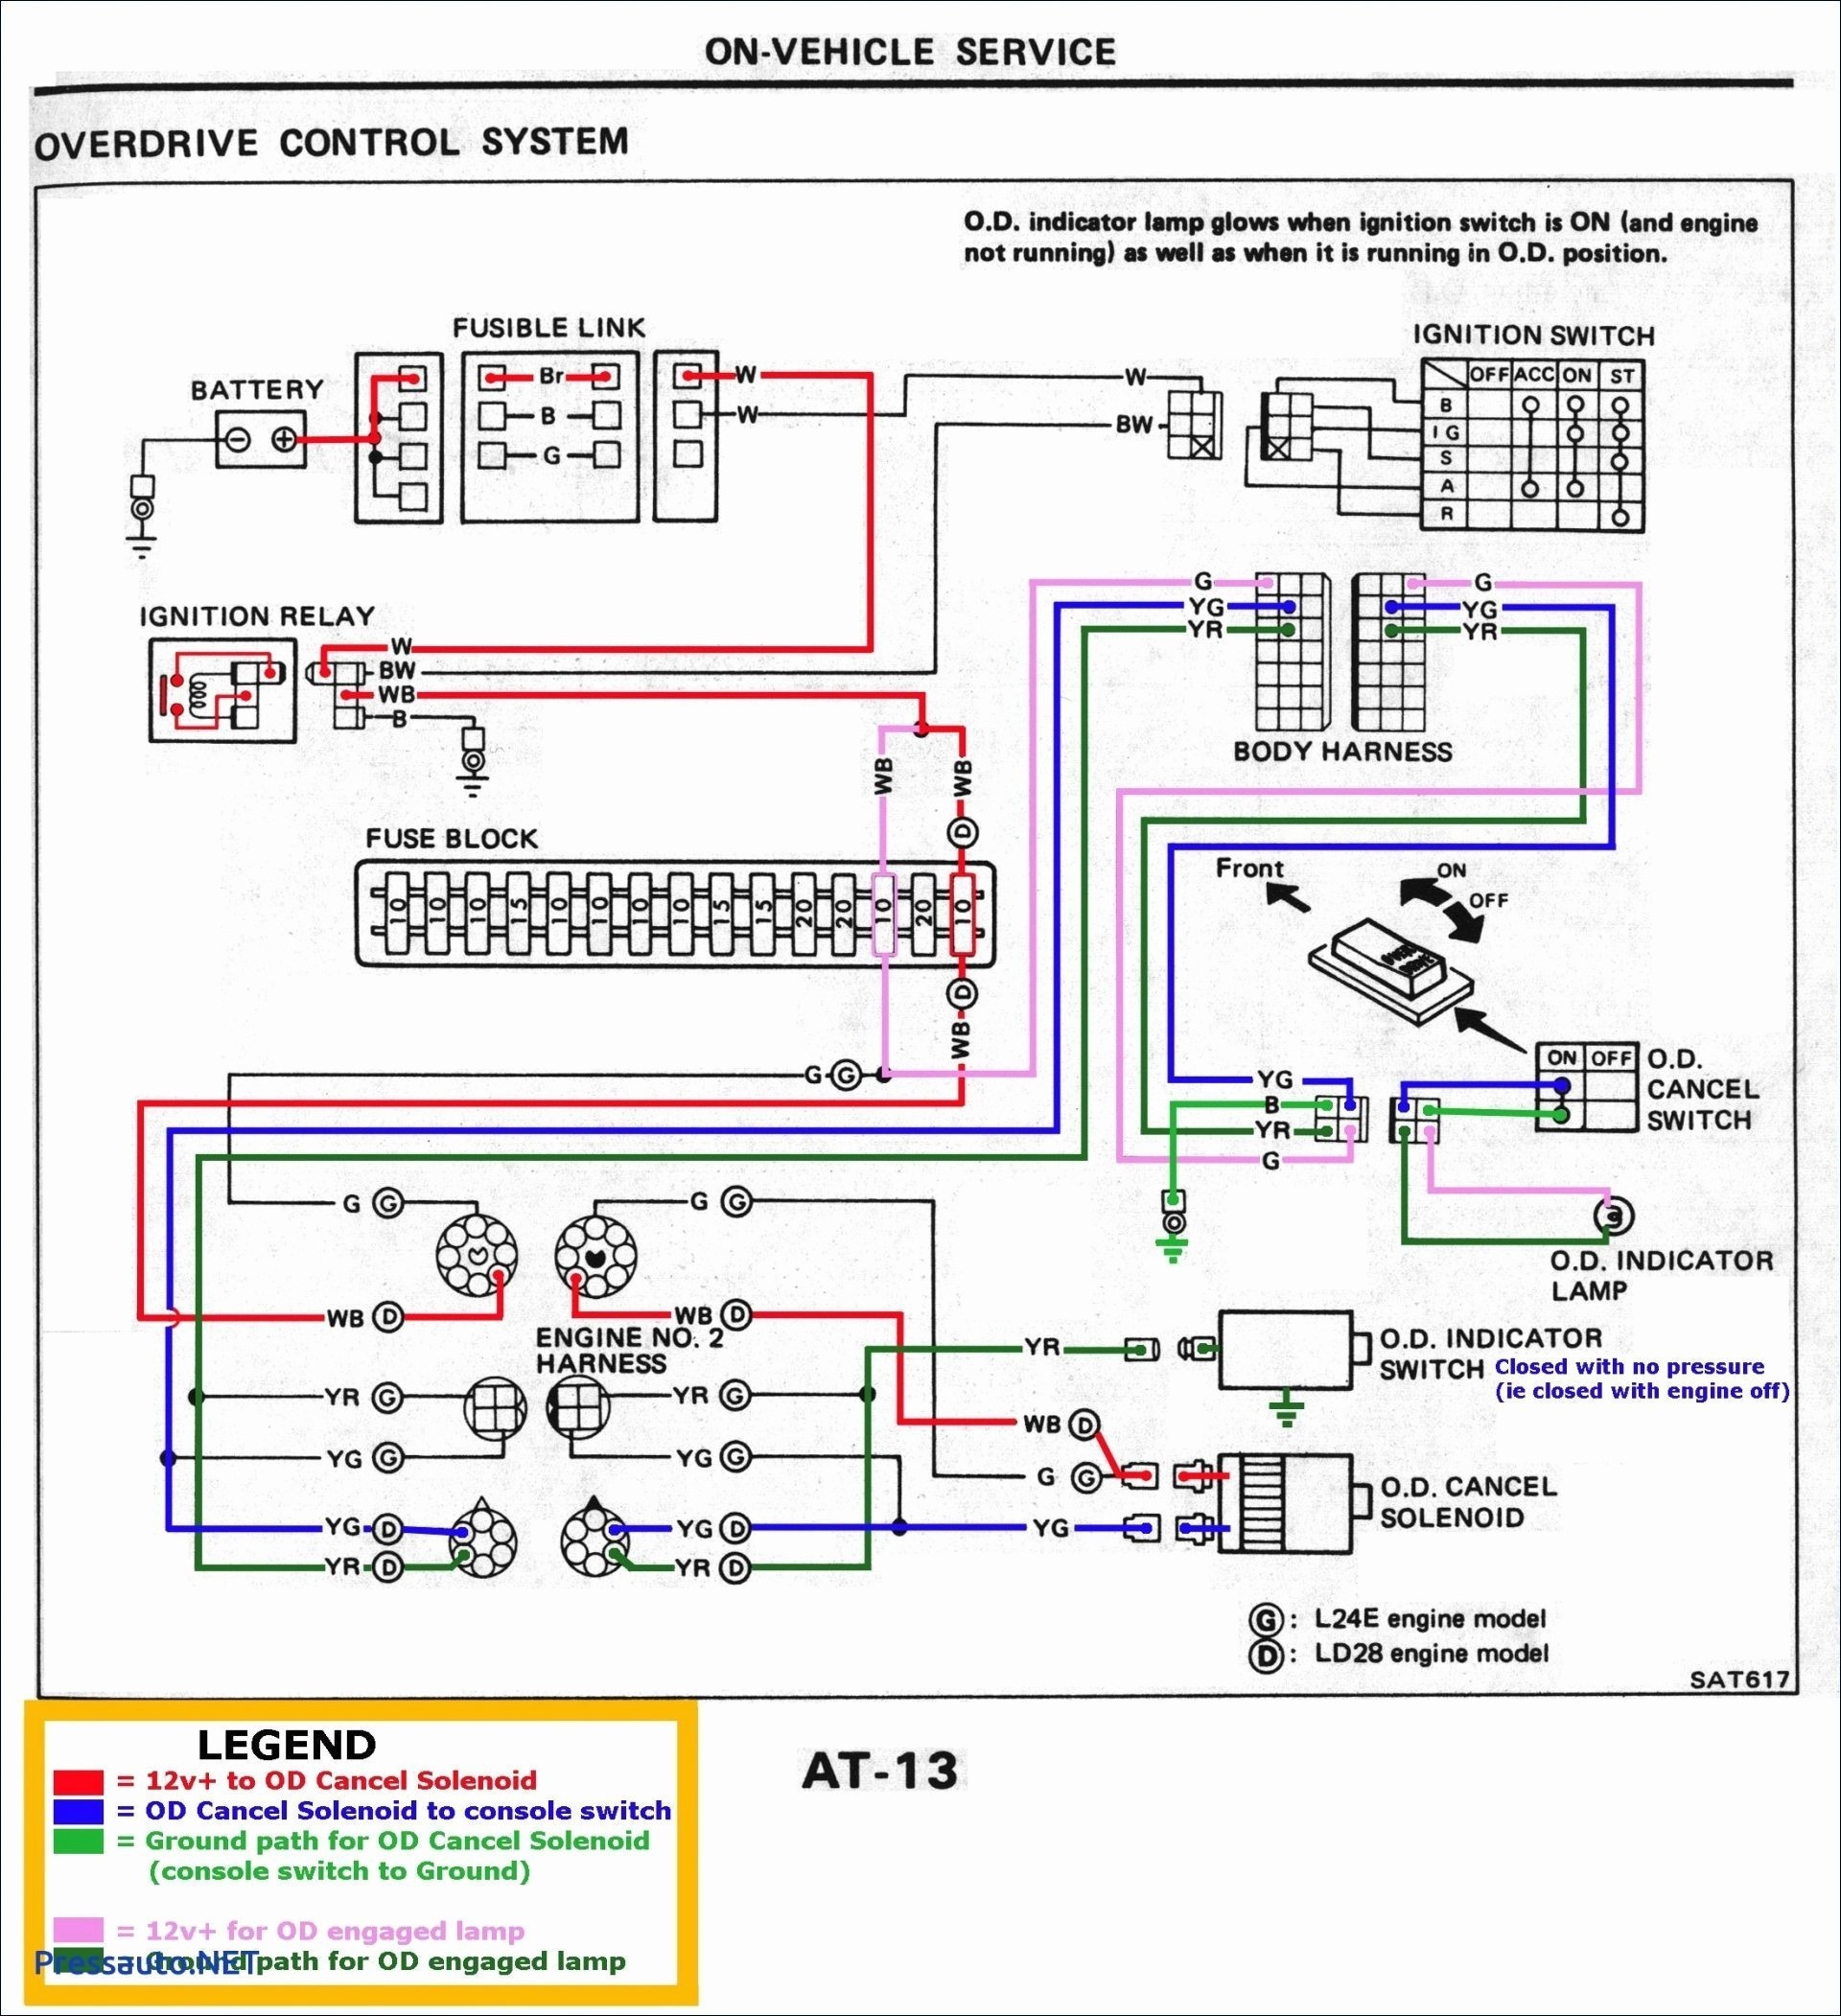 Wiring Diagram Switch to Light New Wiring Diagram for Light with 2 Switches New Light Switch